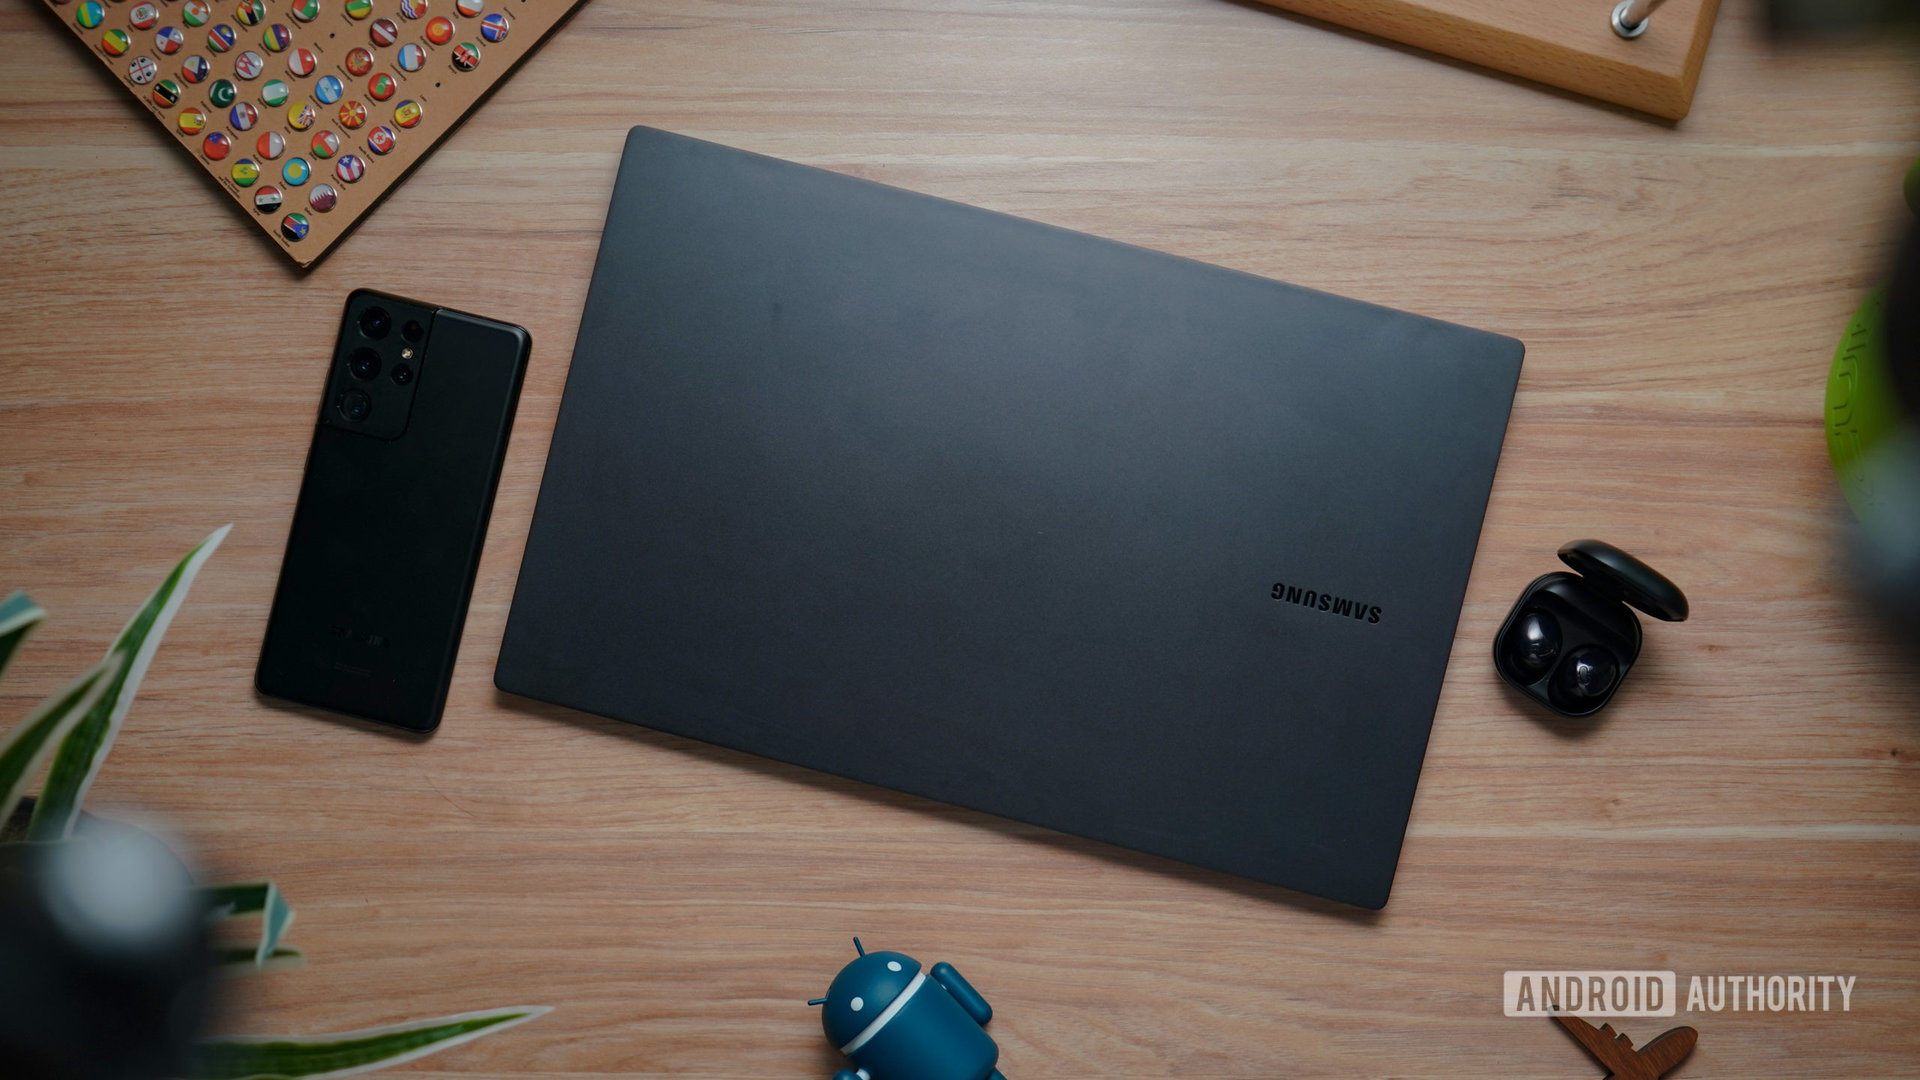 SAMSUNG GALAXY BOOK2 PRO with phone and buds closed